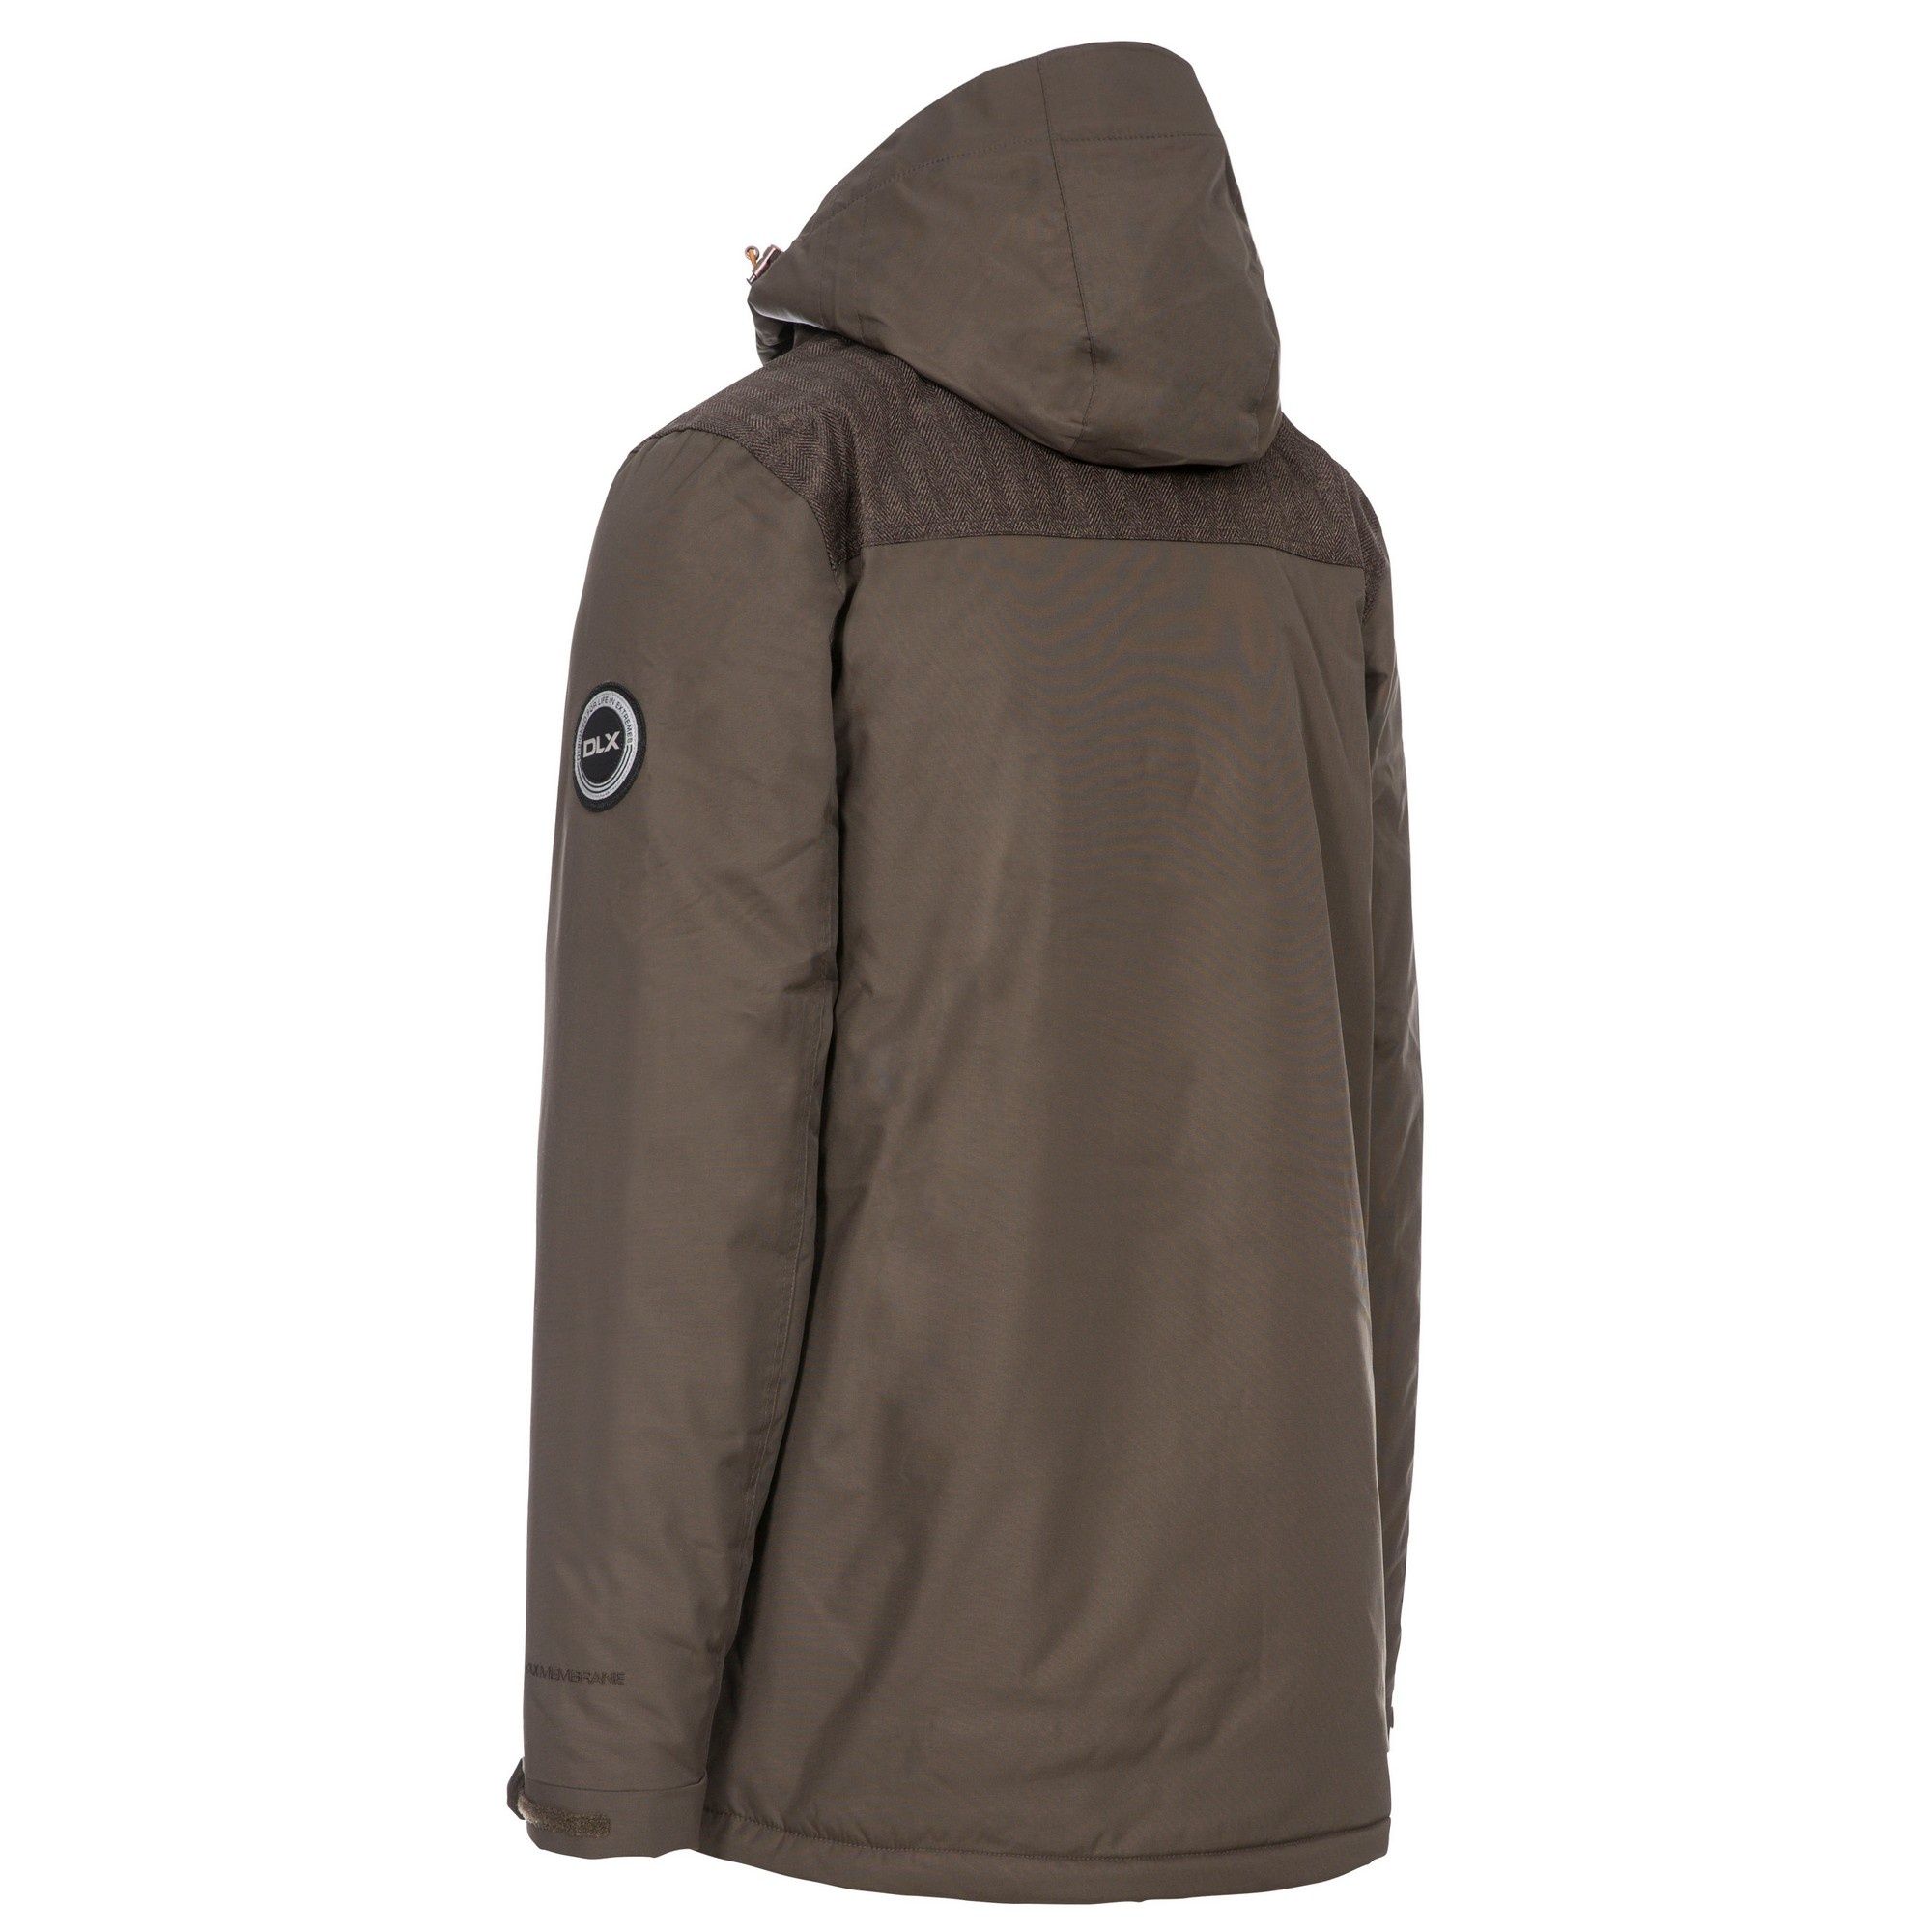 Adjustable zip off hood. Zipped front under stormflap. 2 zipped chest pockets, 2 double entry lower pockets. Corduroy facings. Adjustable cuff tabs and drawcord at hem. Inner pocket. Waterproof 10000mm, breathable 5000mvp, windproof, taped seams. Shell 1: 100% Polyamide, PU coating, Shell 2: 100% Polyester, TPU membrane, Lining: 100% Polyester, Filling: 100% Polyester Down Touch Filling. Trespass Mens Chest Sizing (approx): S - 35-37in/89-94cm, M - 38-40in/96.5-101.5cm, L - 41-43in/104-109cm, XL - 44-46in/111.5-117cm, XXL - 46-48in/117-122cm, 3XL - 48-50in/122-127cm.